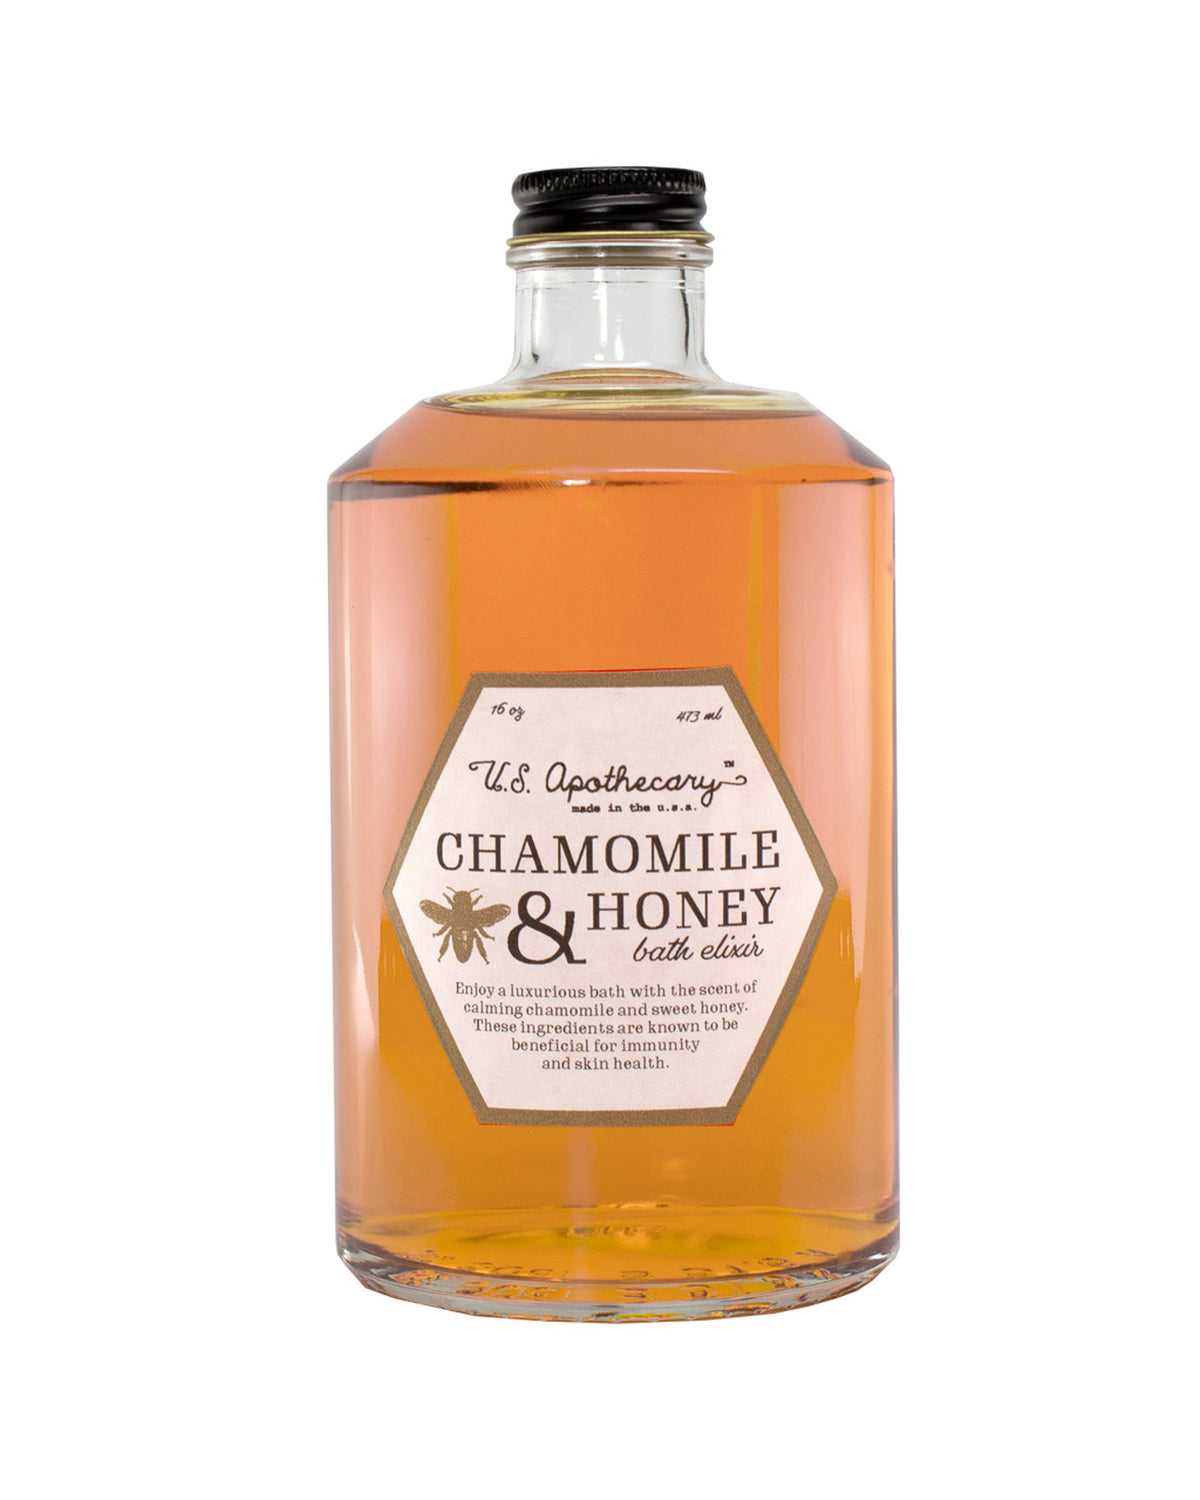 A clear glass bottle filled with amber-colored liquid, labeled "U.S. Apothecary Chamomile & Honey Bath Elixir," designed for a relaxing bath, against a white background.